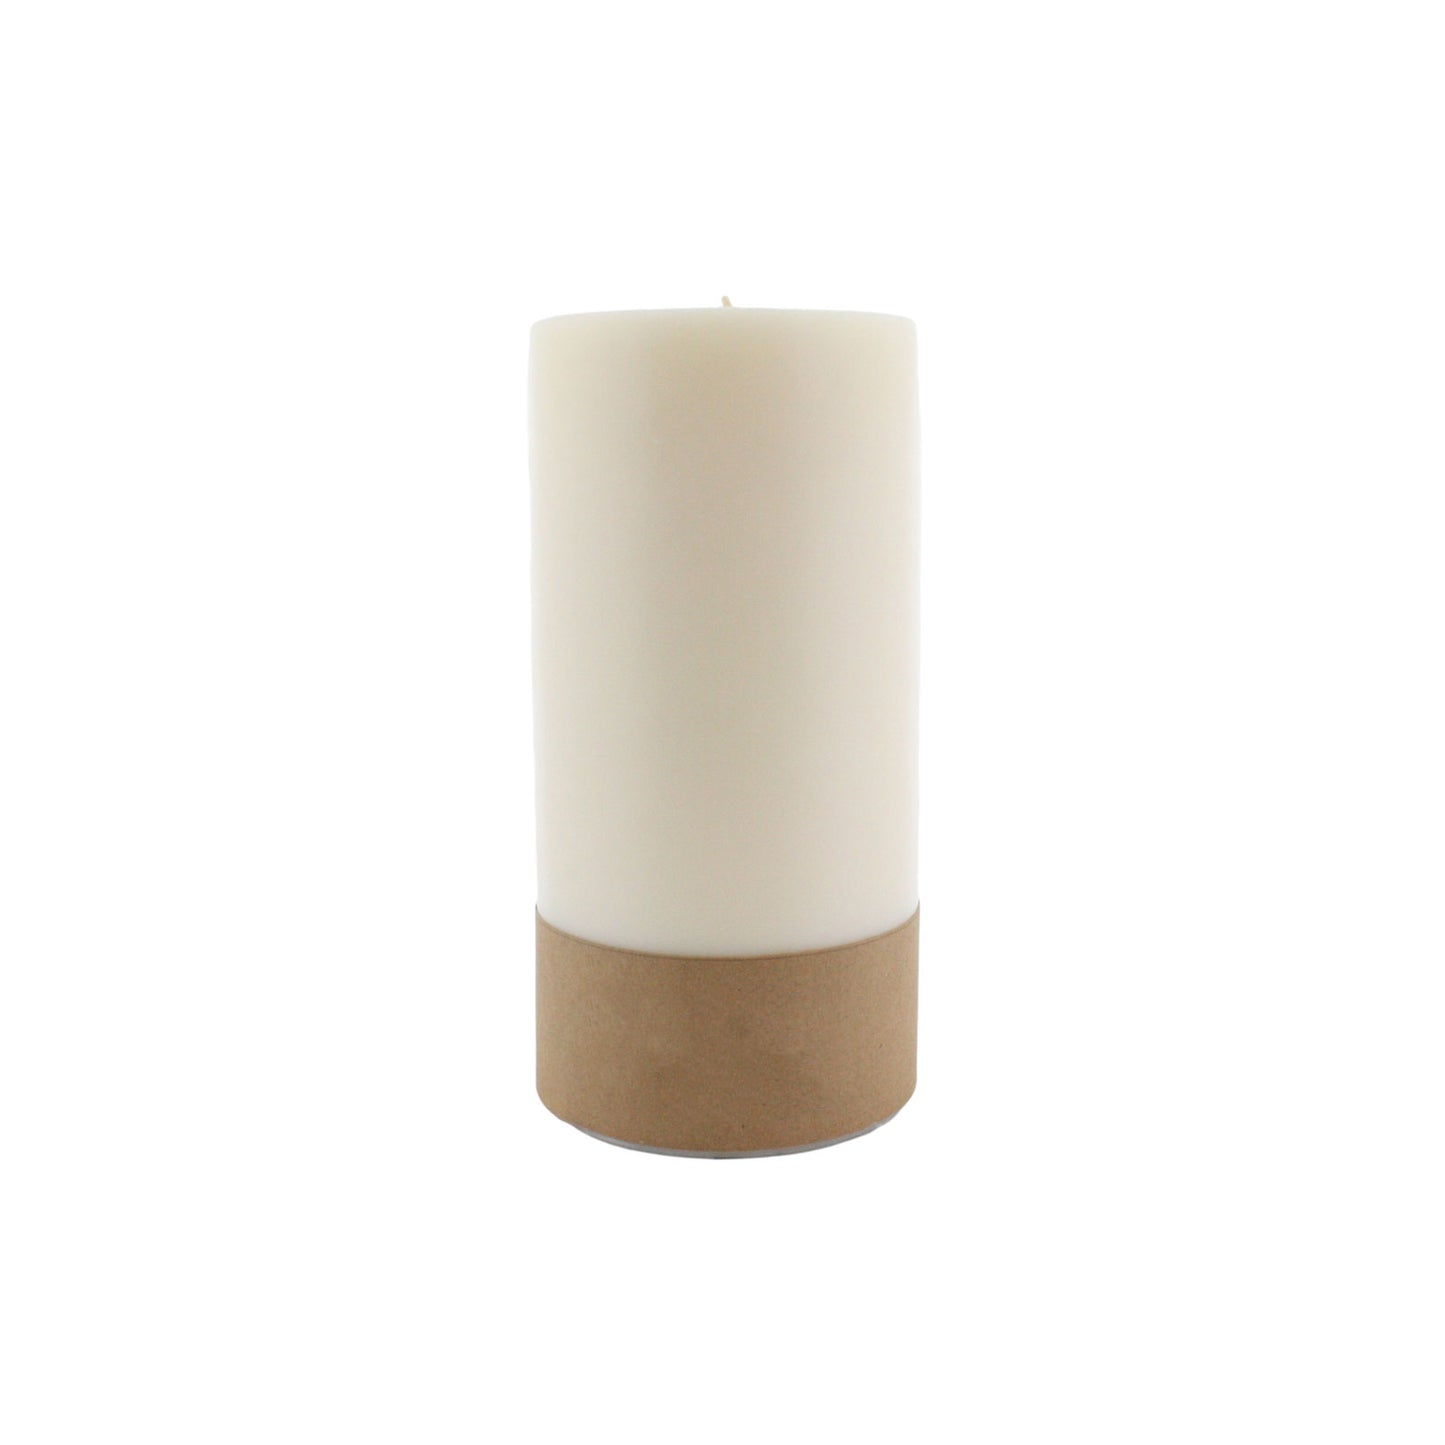 Pillar Candle in Ivory, 4 x 8"